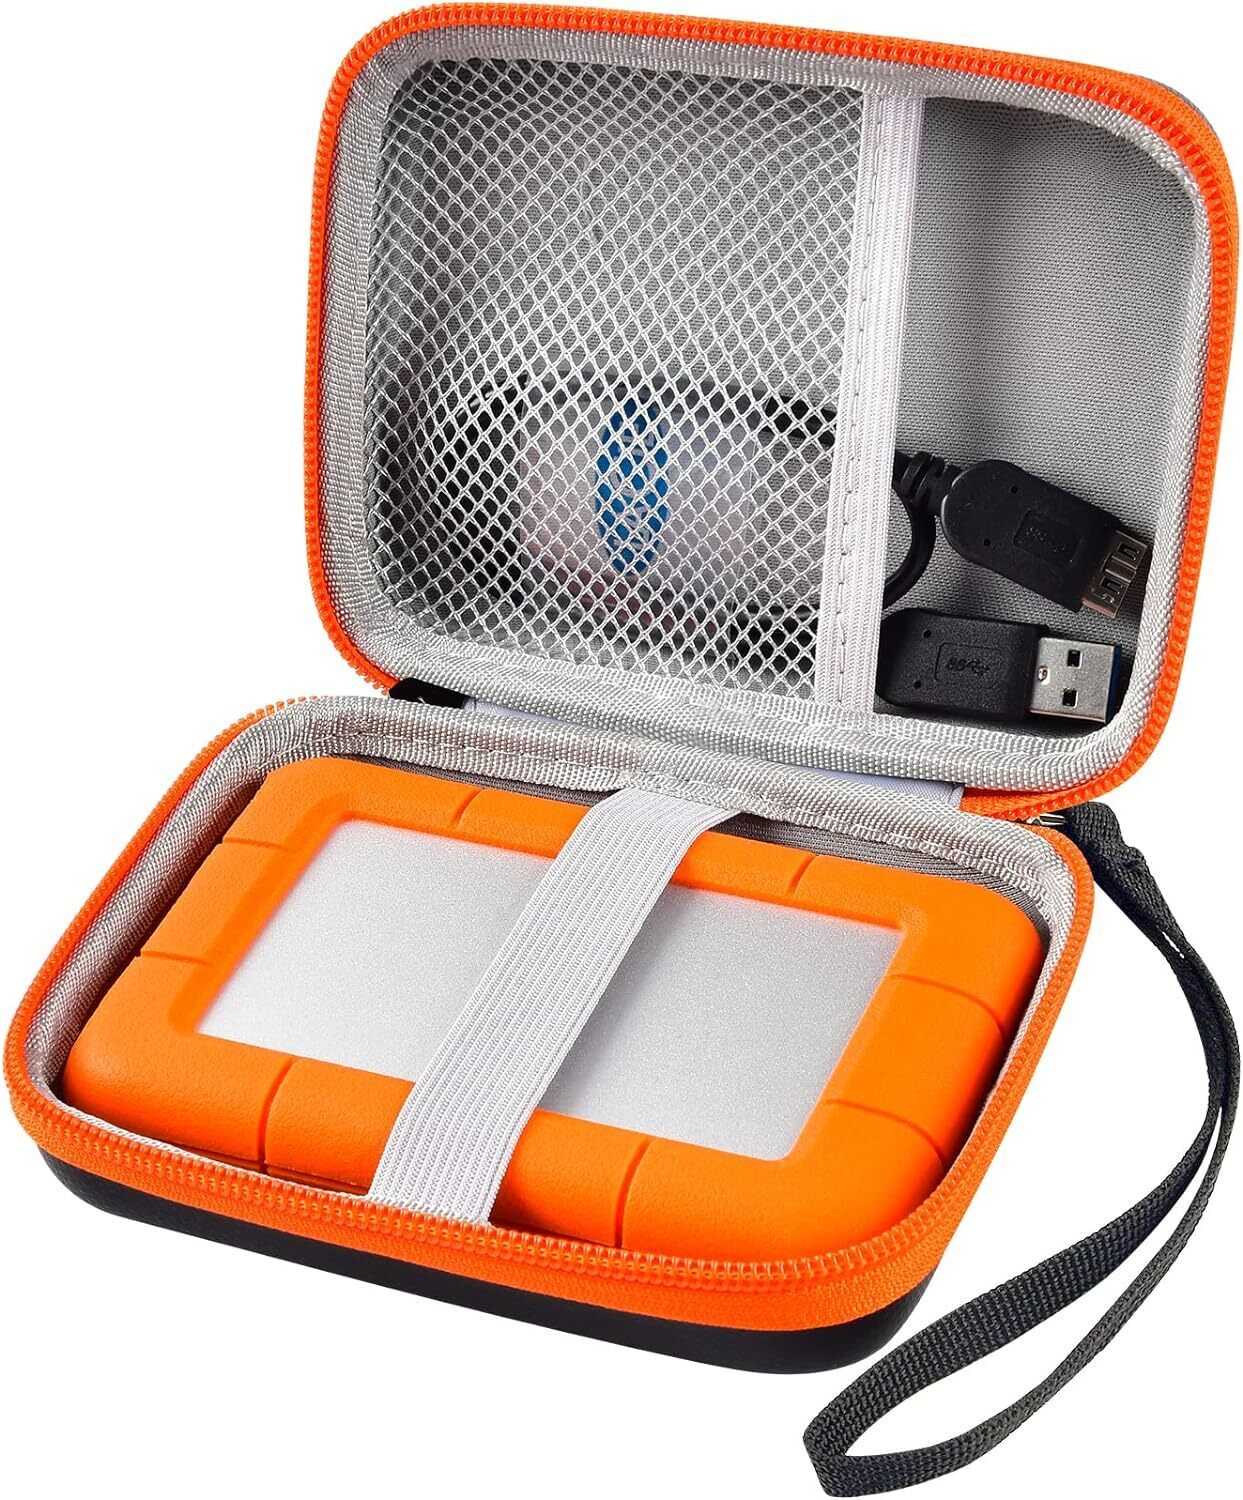 Case Compatible with LaCie Rugged External Hard Drive Portable Storage Holder